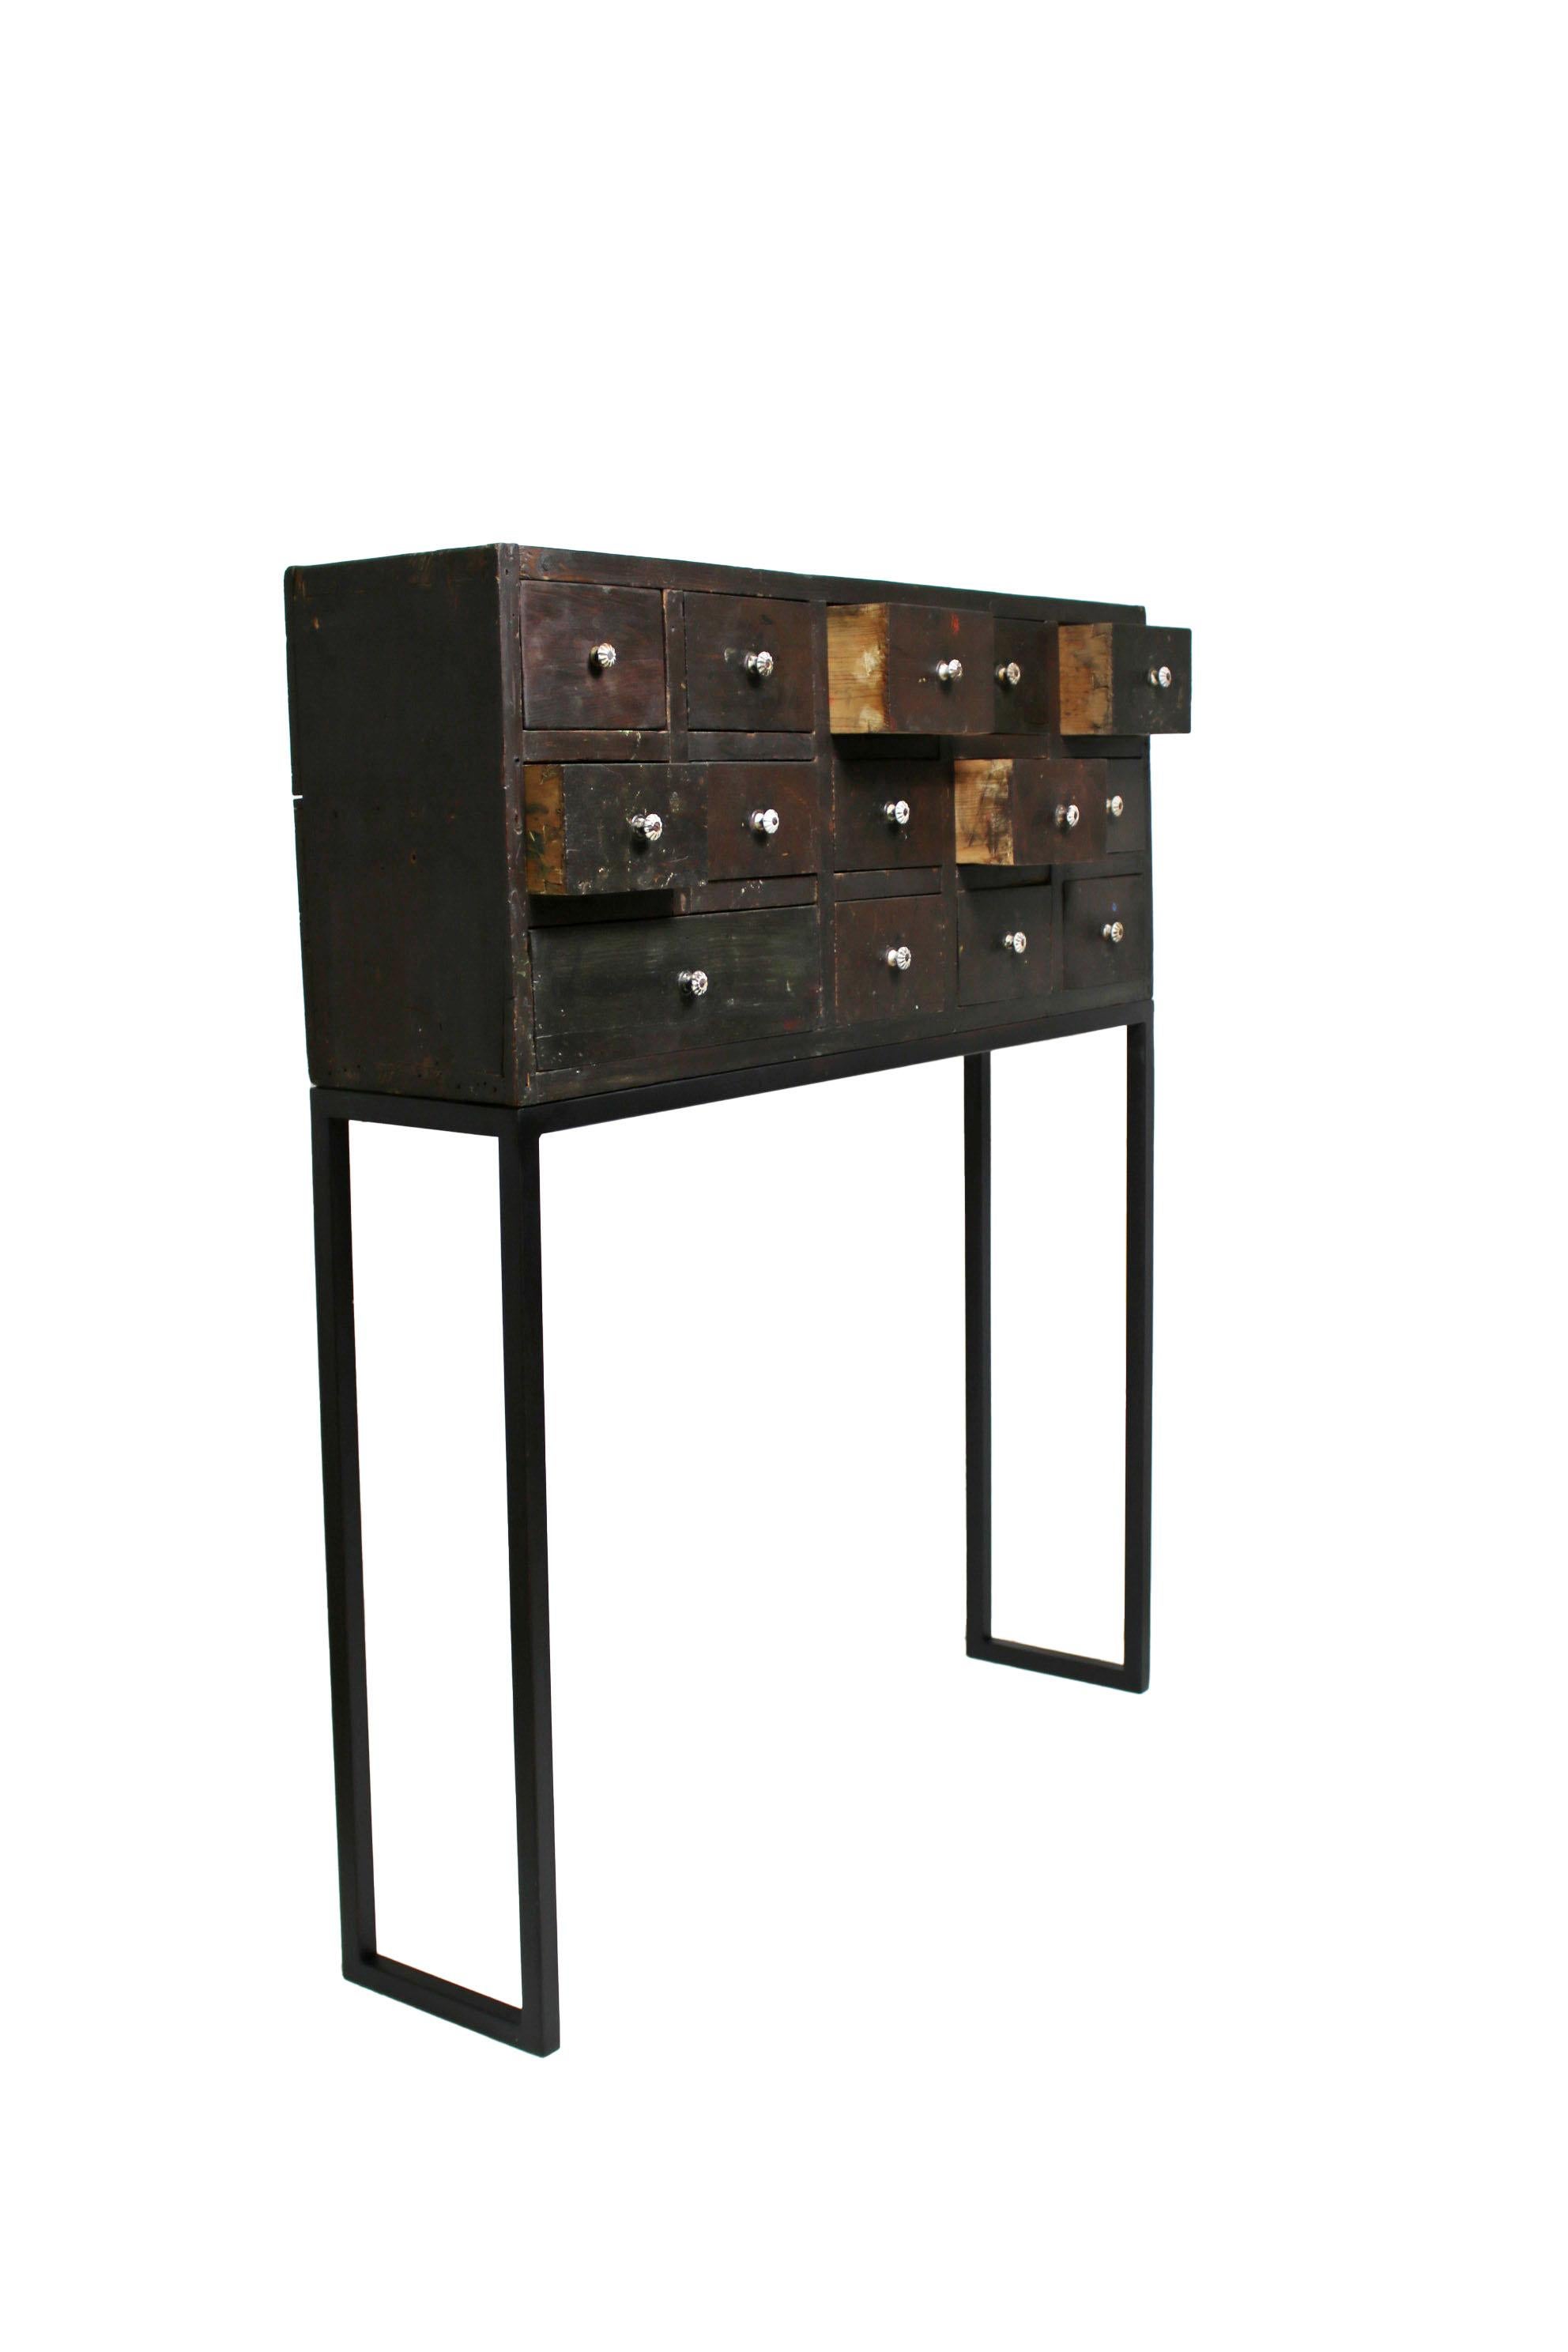 Iron 19th Century Cabinet For Paint Samples For Sale